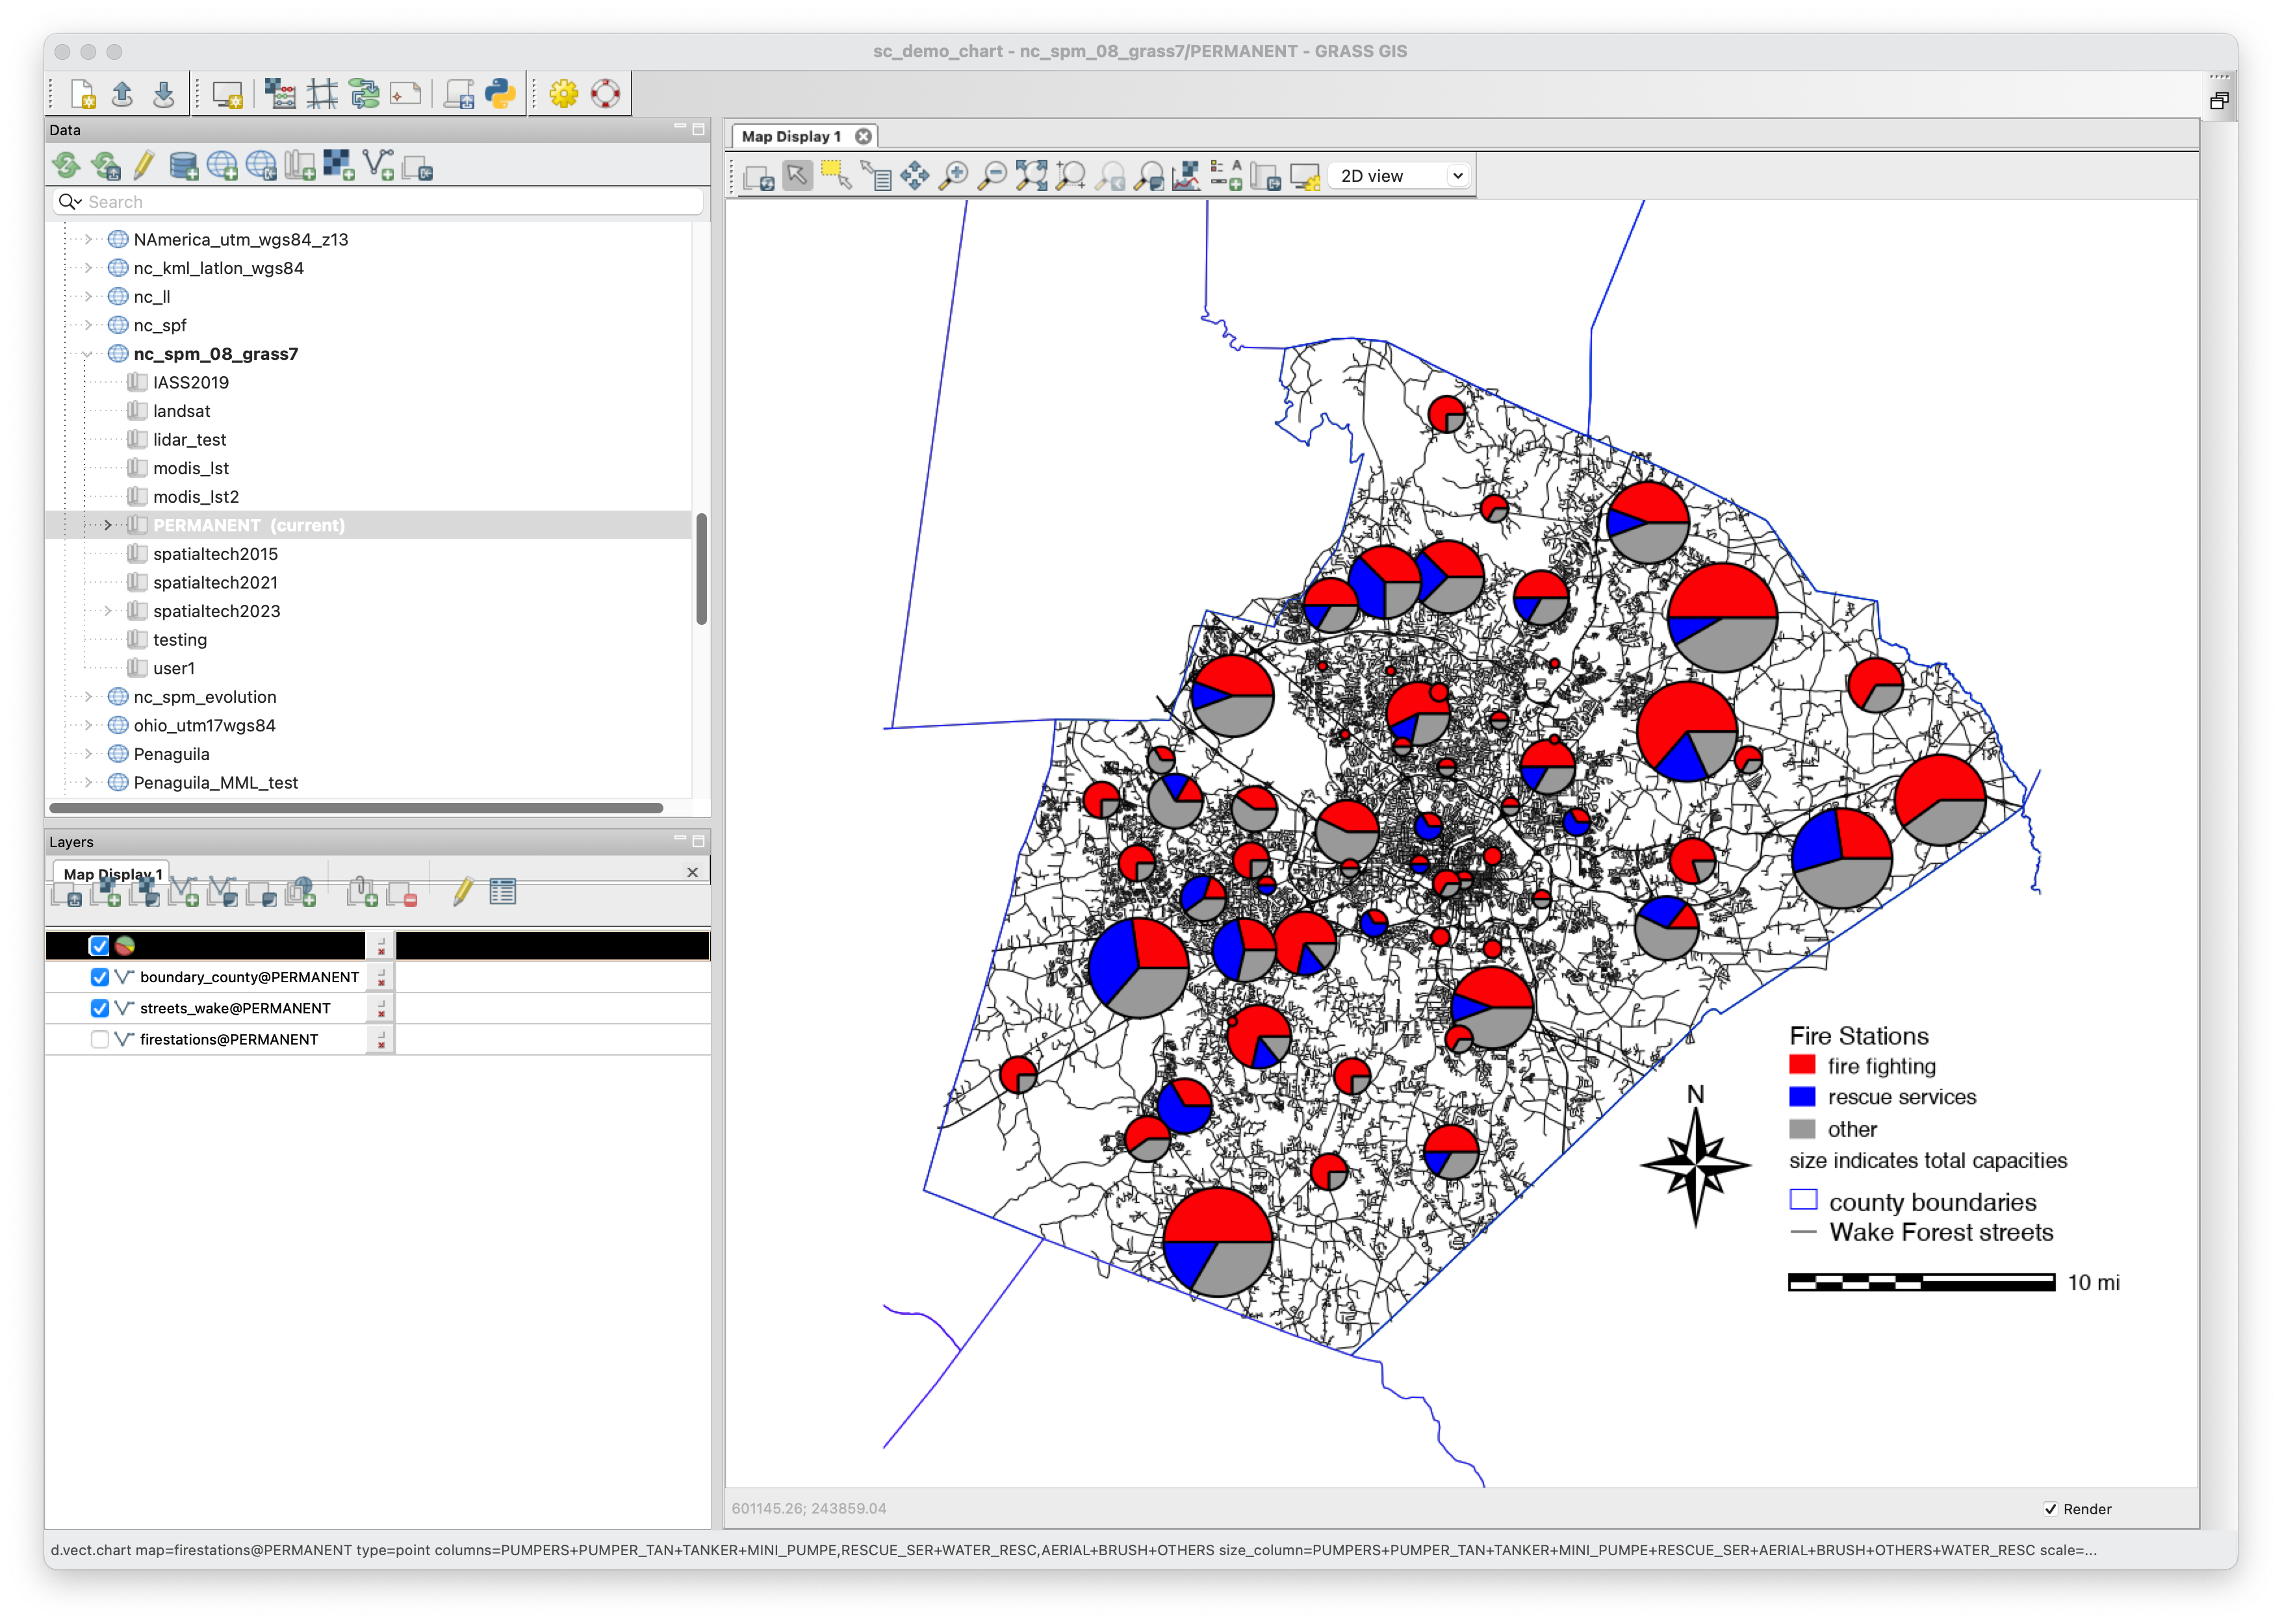 GRASS GIS 8.3.1 graphical user interface